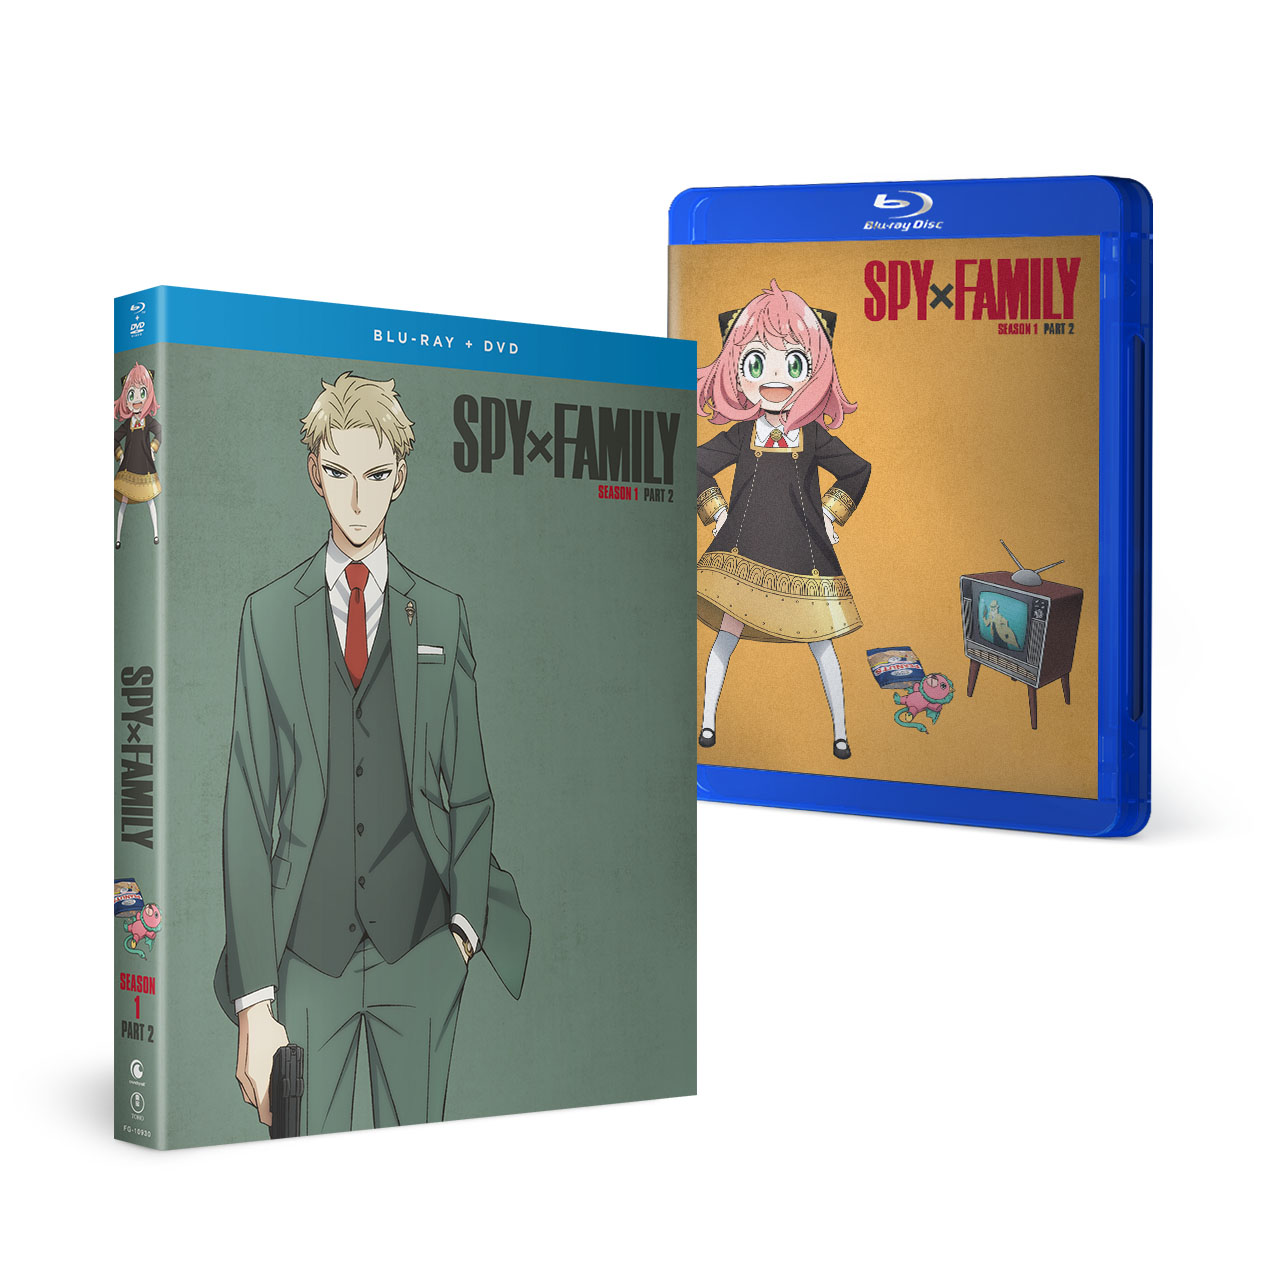 Limited Edition SPY x FAMILY Part 2, & More Coming To BRD/DVD